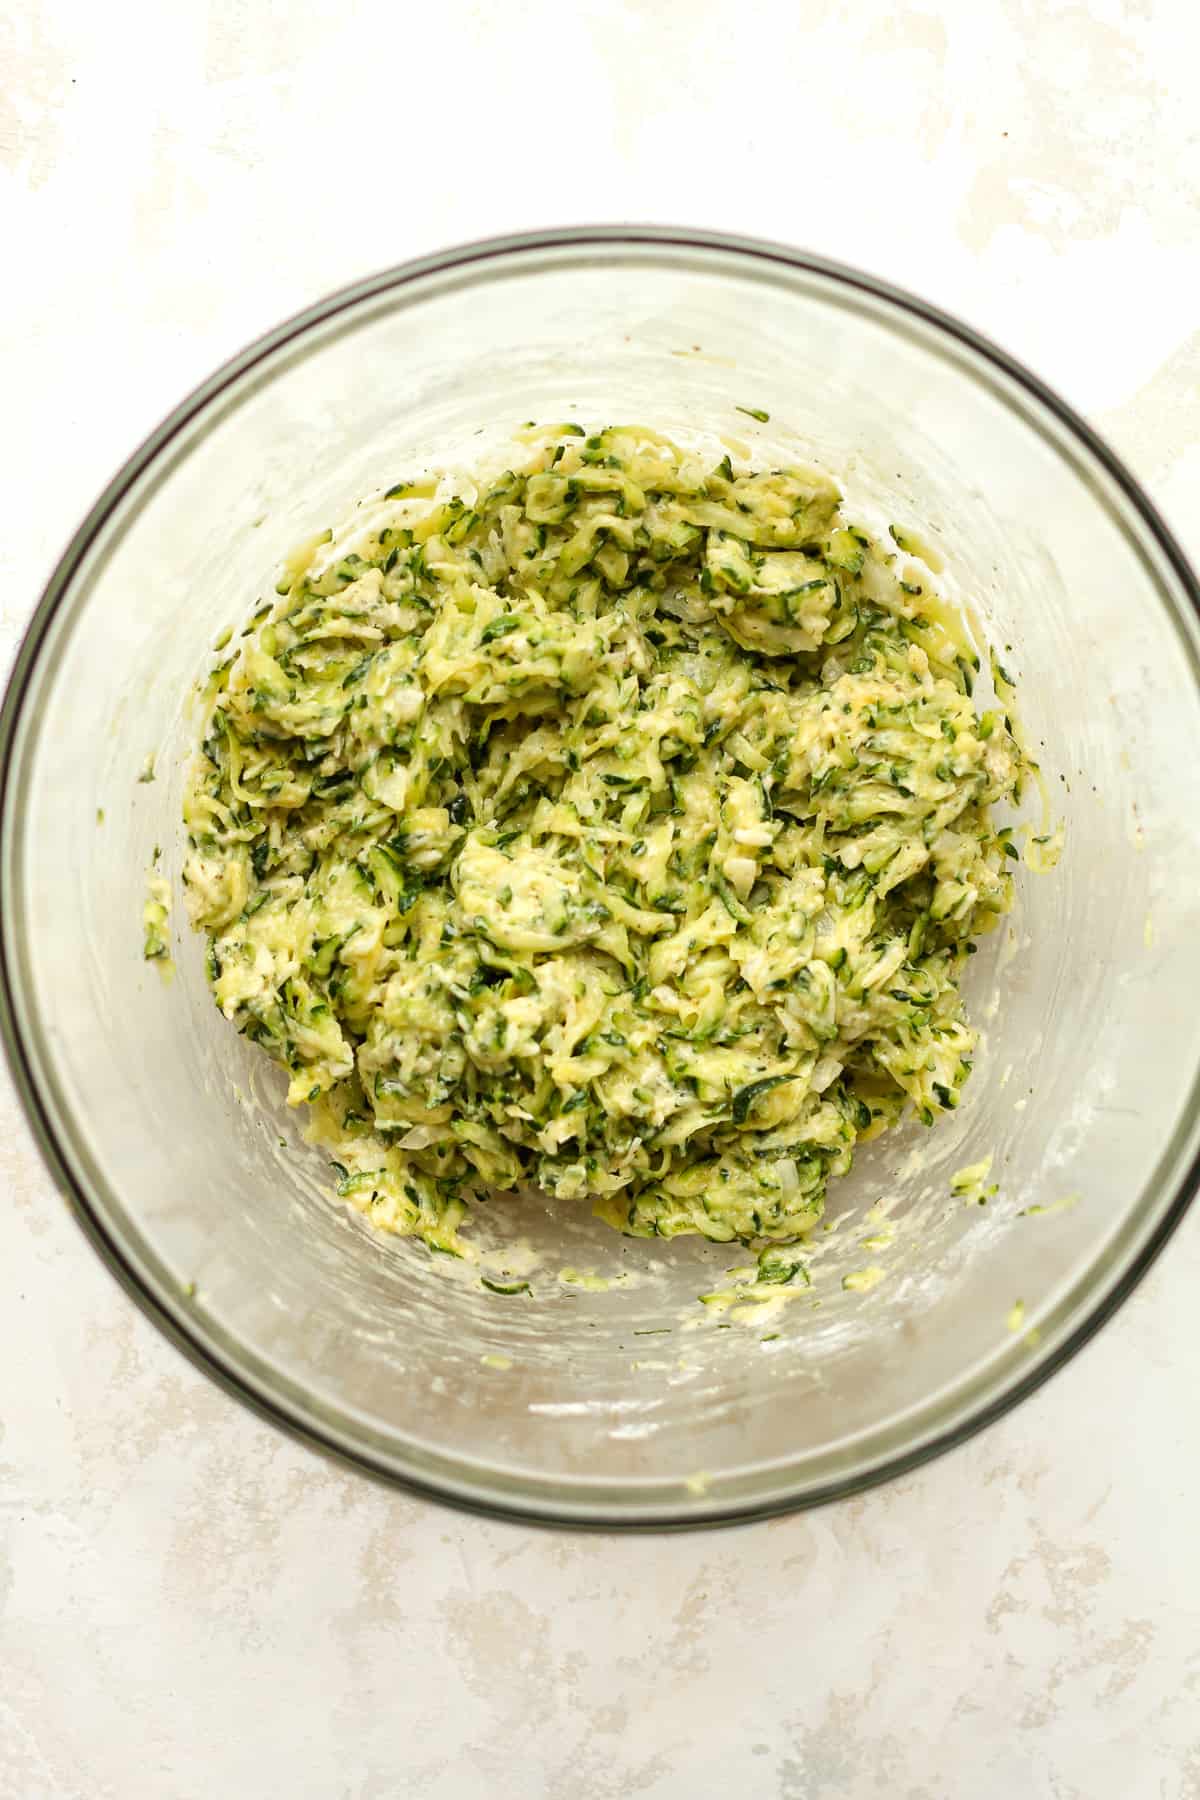 A bowl of the zucchini fritter mixture.